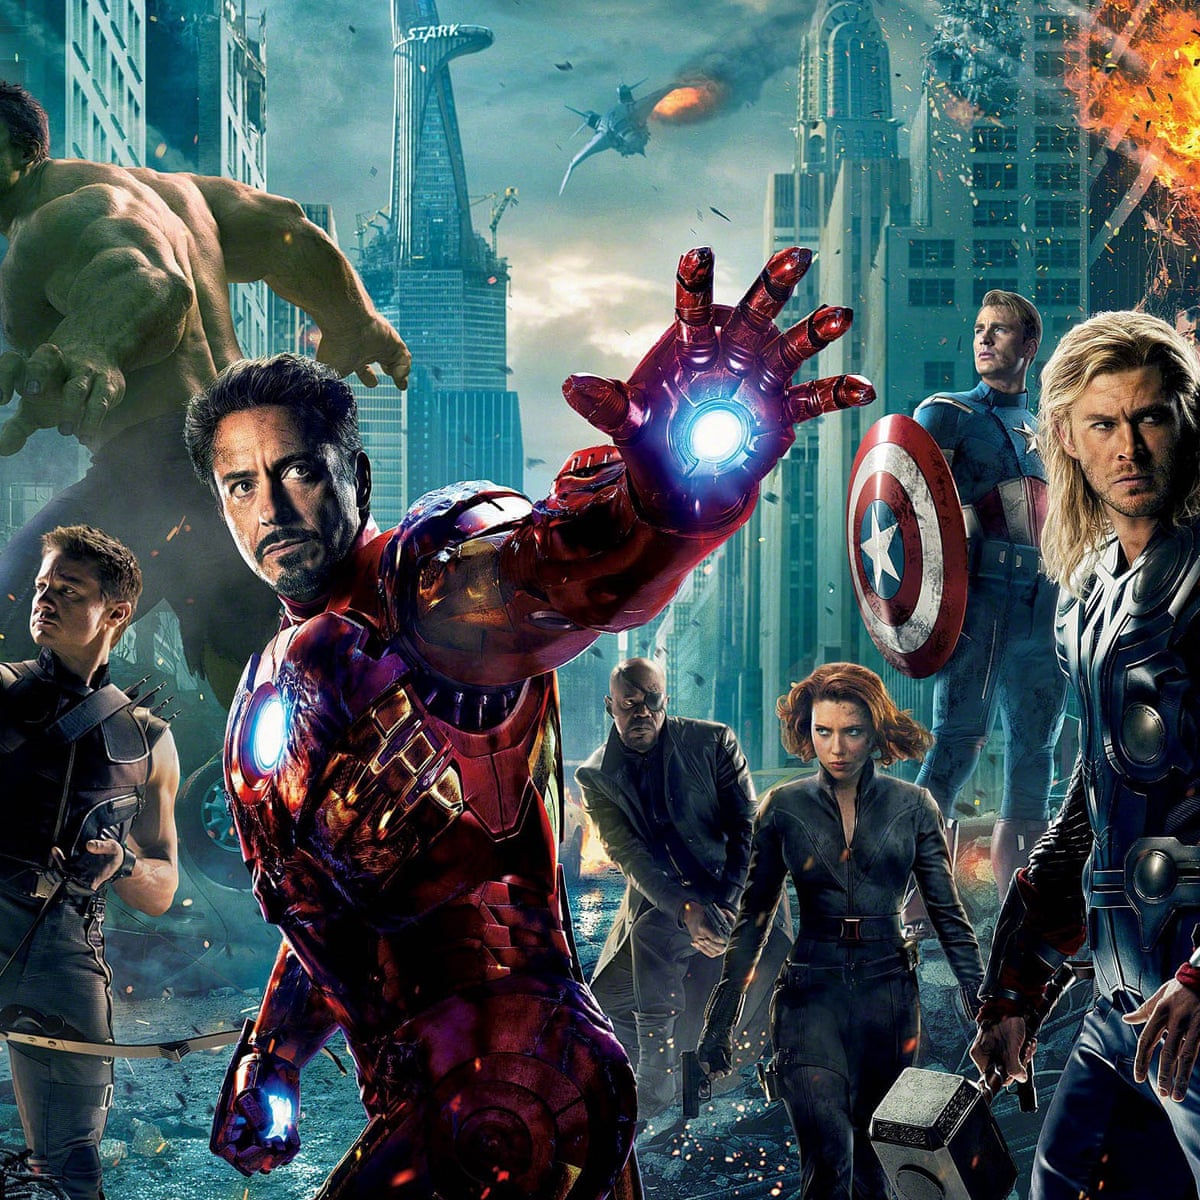 Avengers disassemble: is Marvel's cinematic universe set for a reboot? |  Avengers: Infinity War | The Guardian